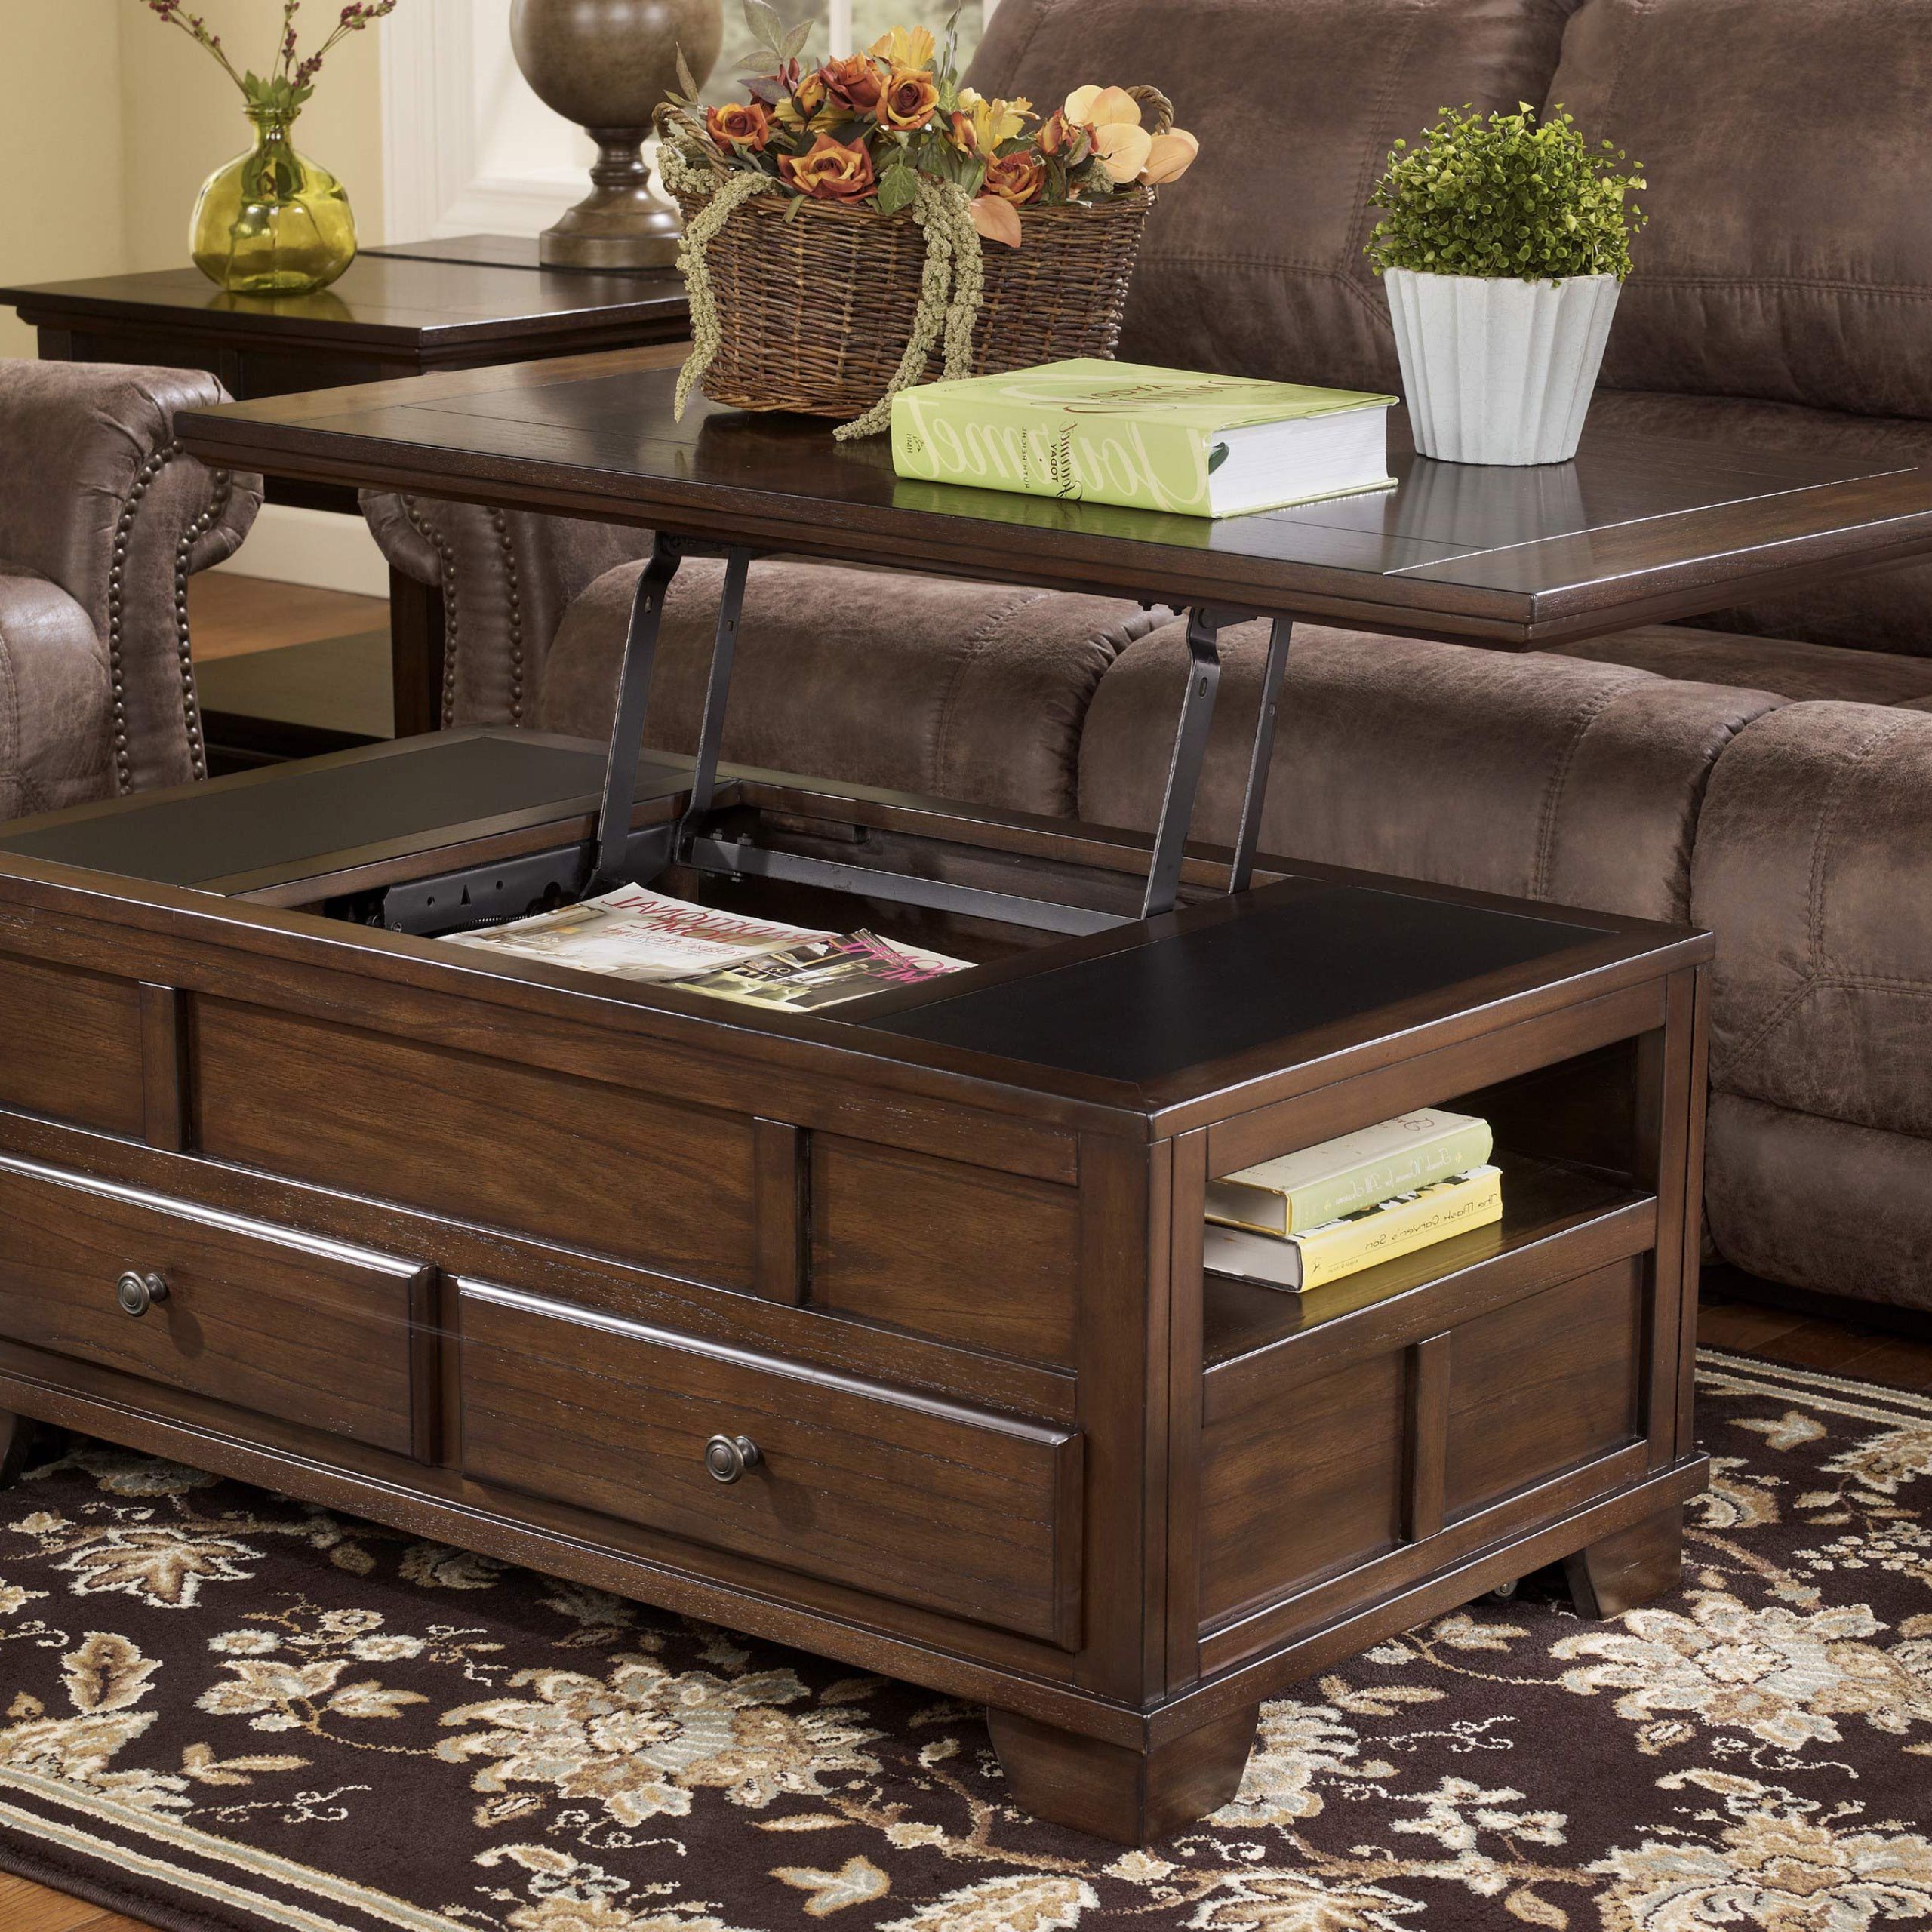 Lift Top Coffee Tables With Storage Pertaining To Lift Top Coffee Tables With Hidden Storage Compartments (View 13 of 20)